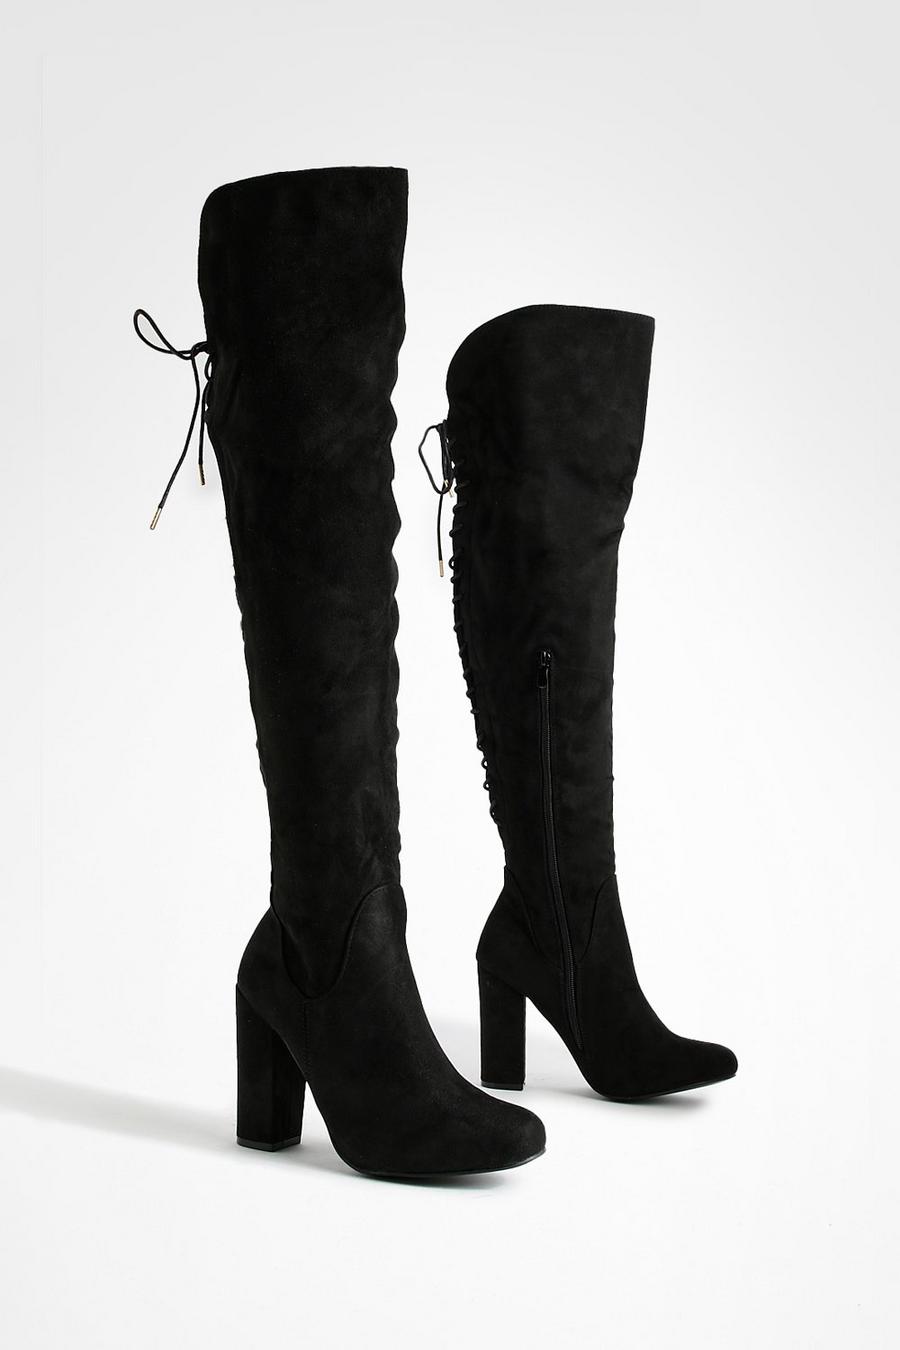 Black negro Lace Back Block Heel Over The Knee High Boots